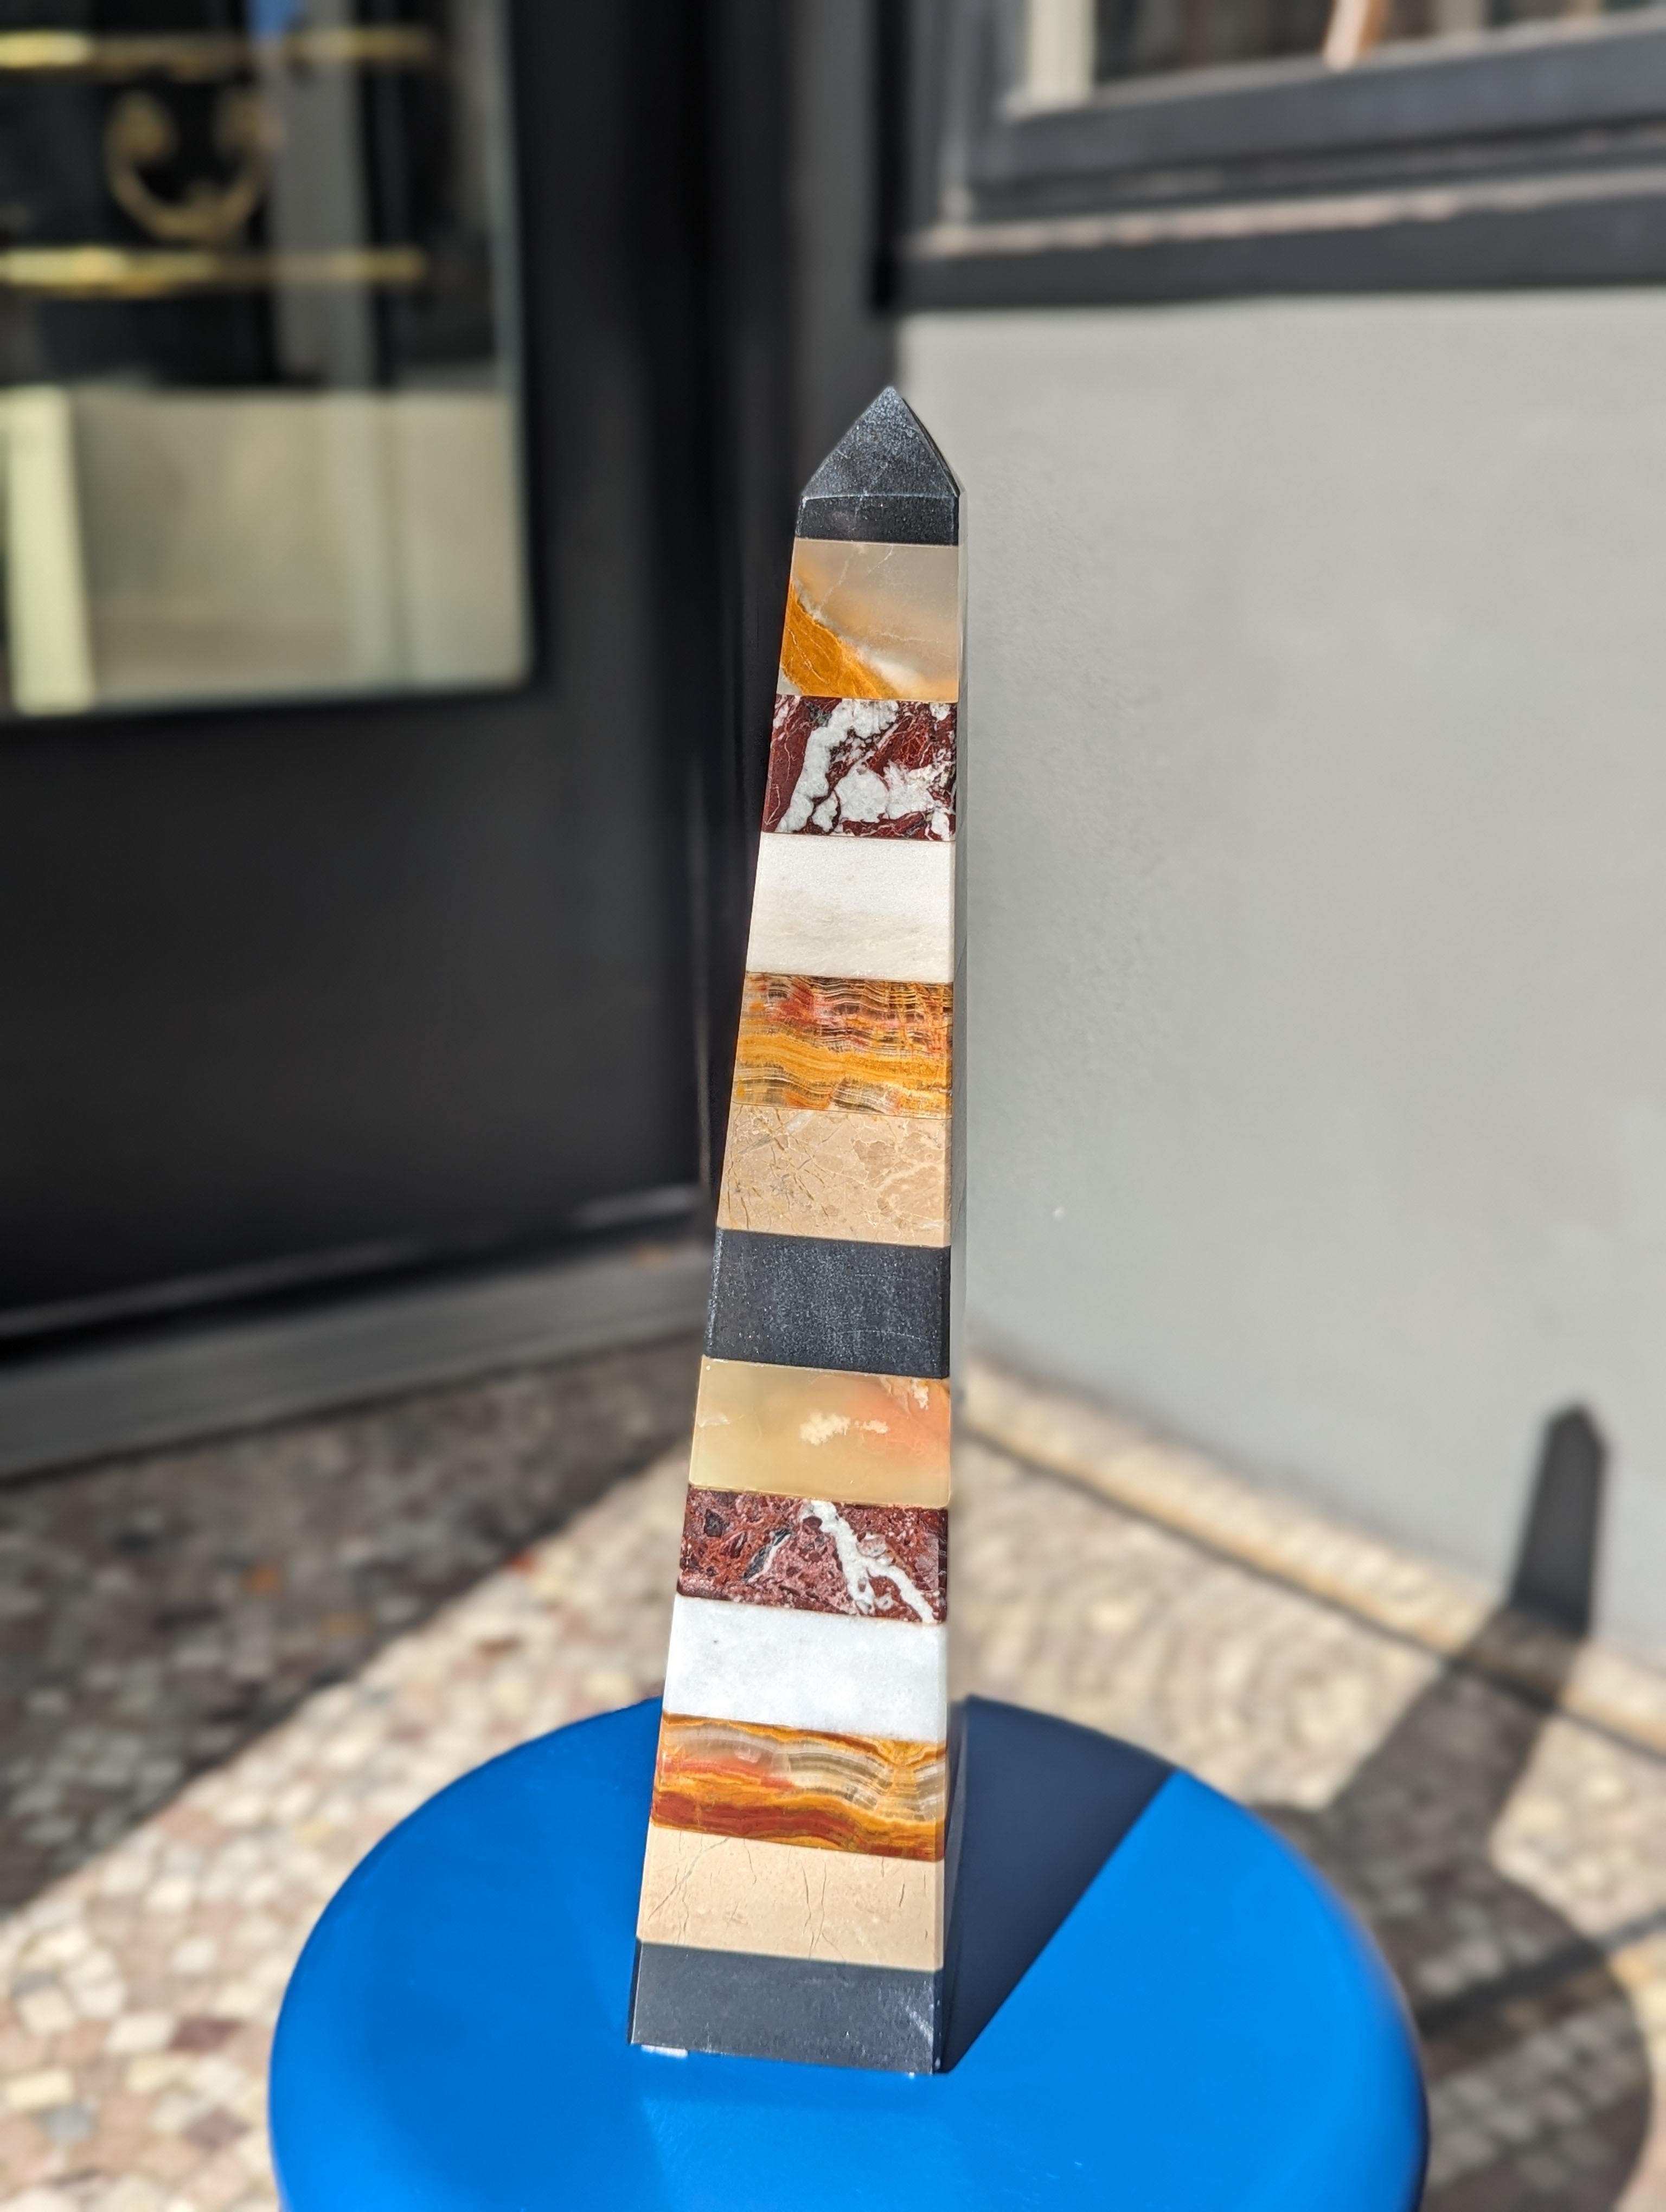 Step into a world where sleek lines meet natural splendor with this 1990s Modern Mixed Stone Geometric Obelisk. Imagine its vibrant onyx, travertine, and marble layers catching the light, casting playful shadows across your bookshelf. This isn't